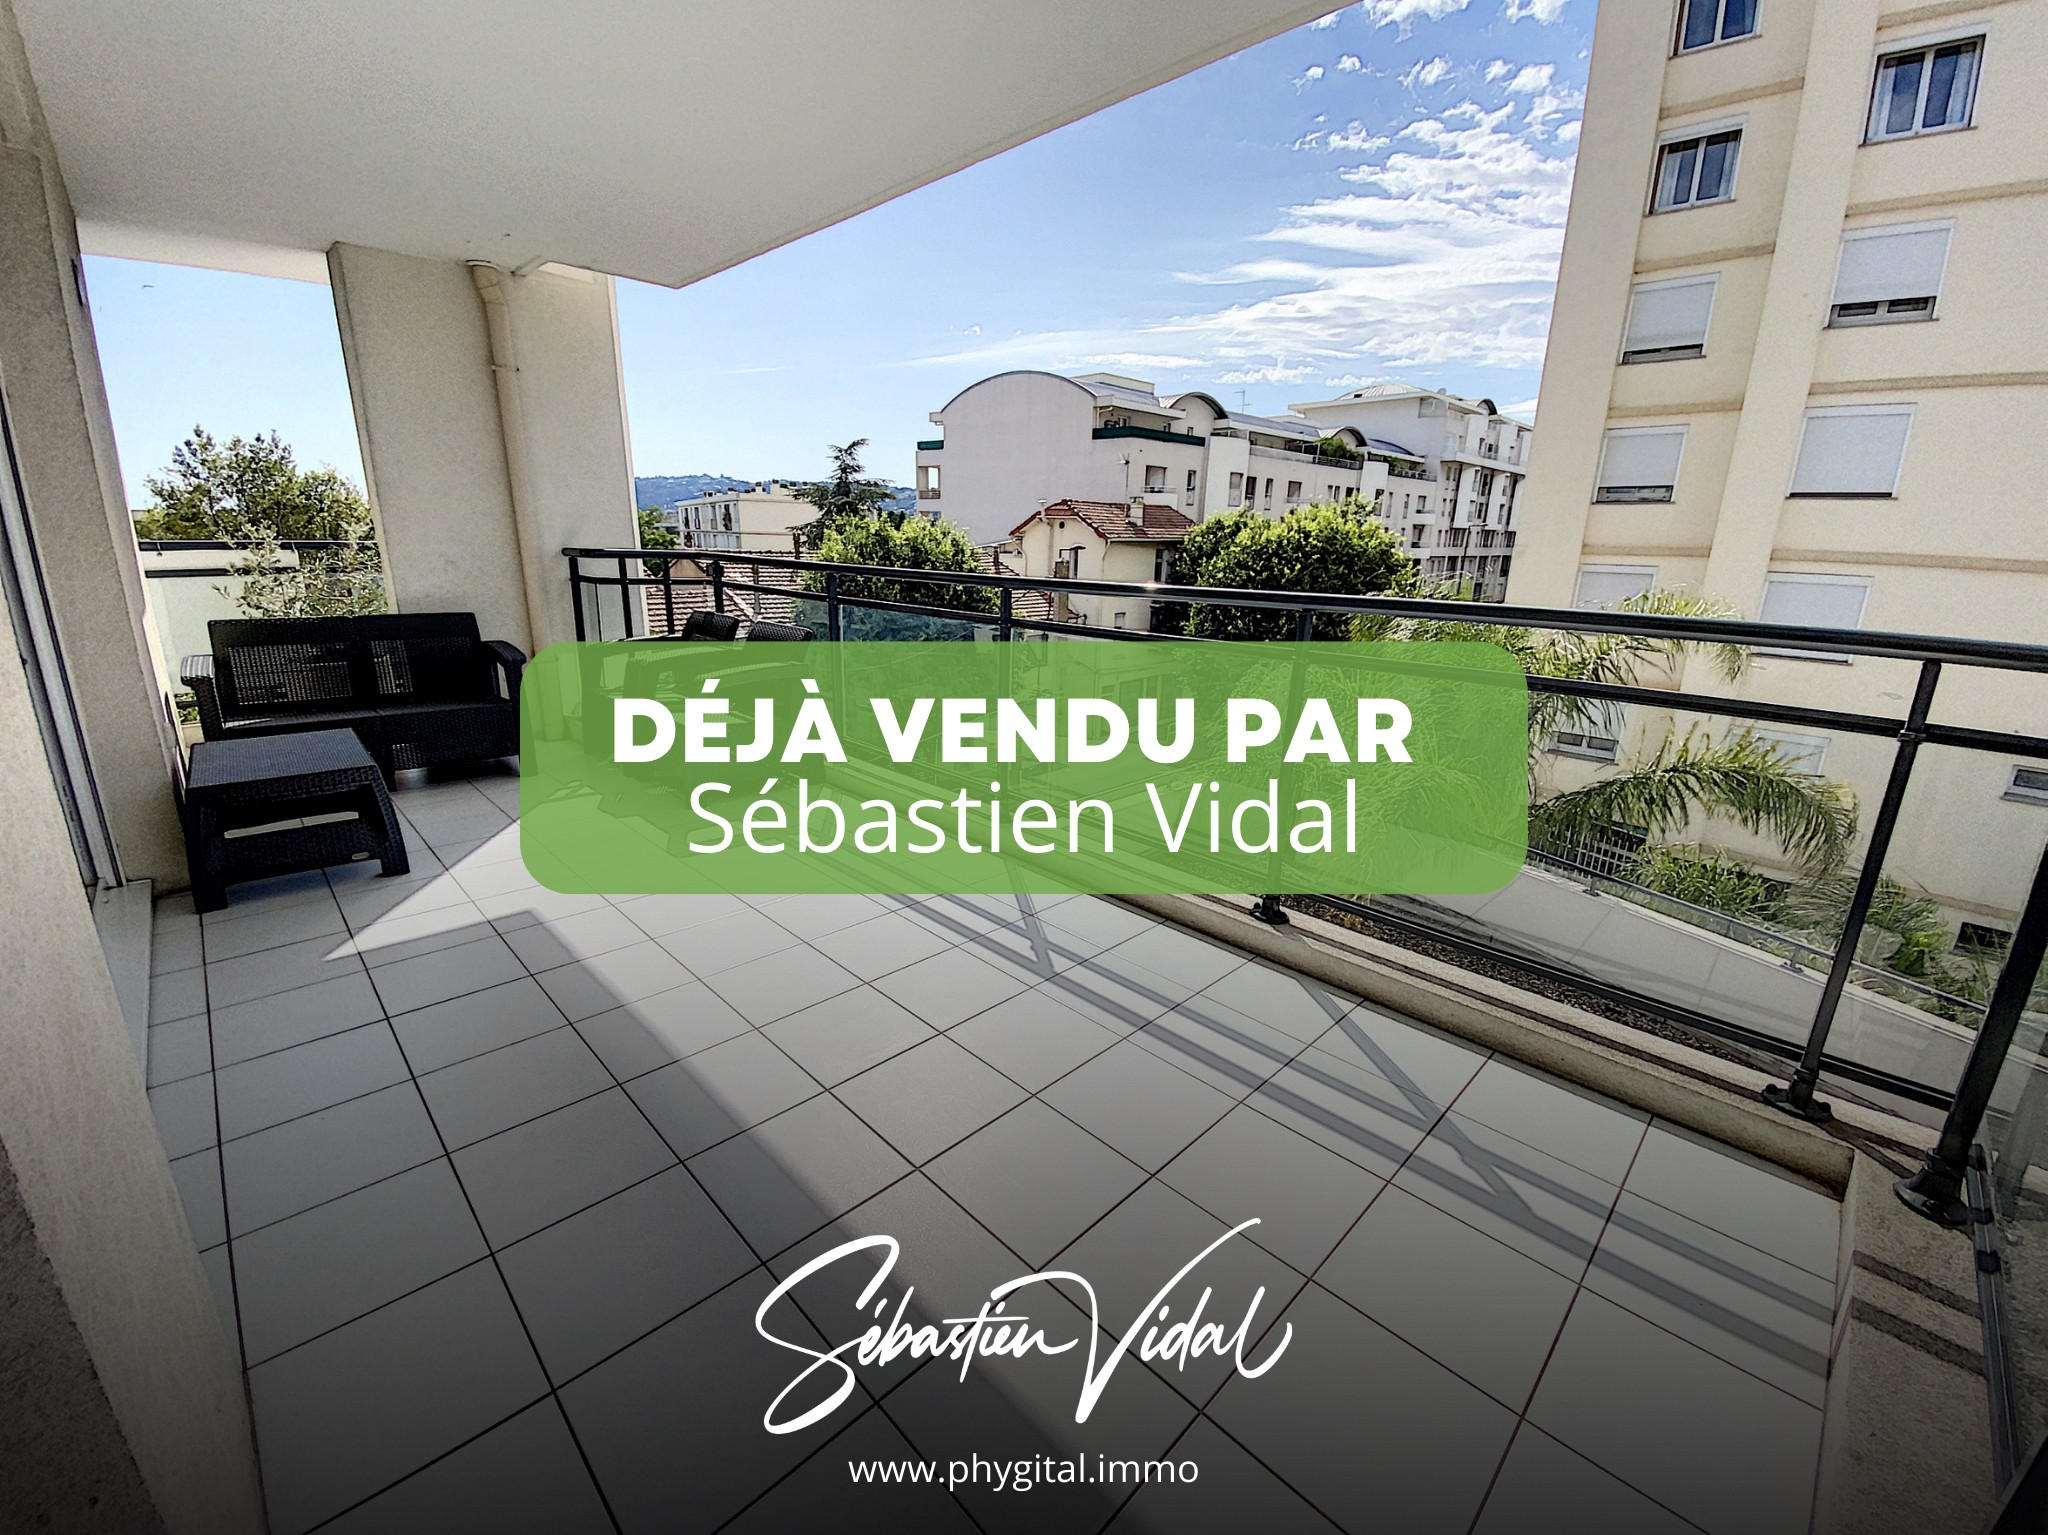 Vente Appartement 73m² 3 Pièces à Antibes (06160) - Phygital.Immo